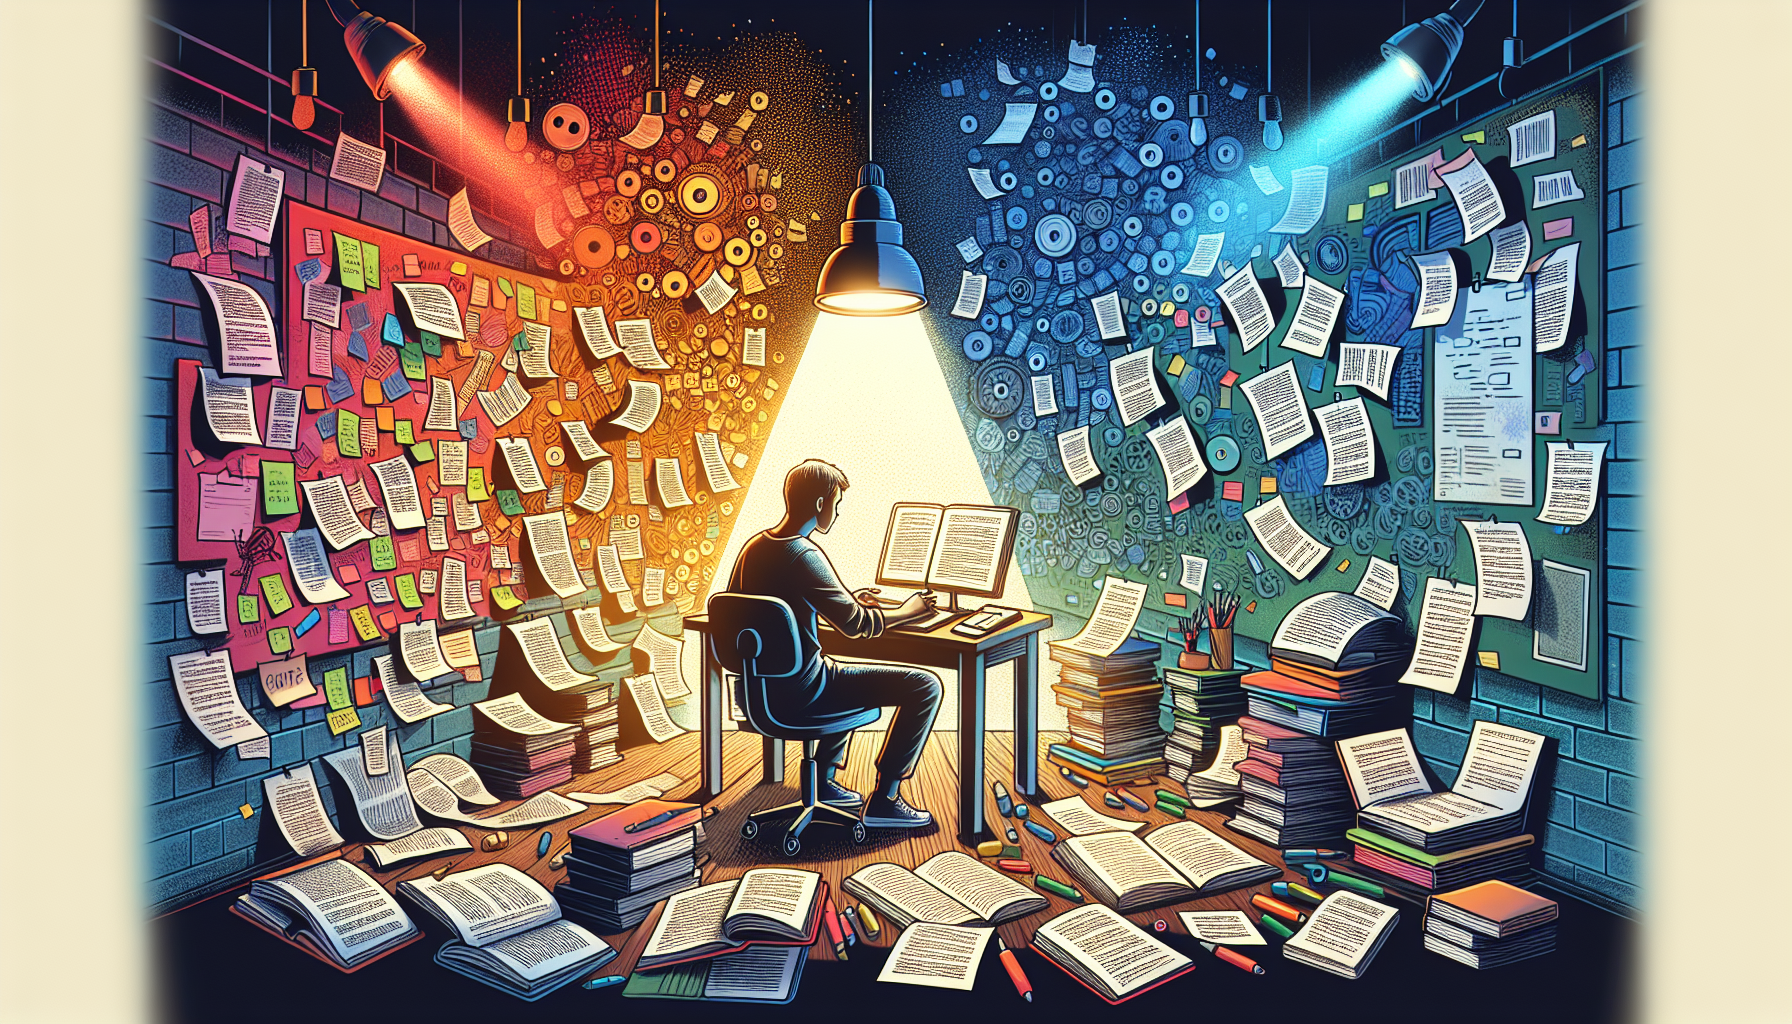 Create an illustration that depicts the process of enhancing screenplays in a modern and colorful style. The image should not contain any text. It might feature a person sitting at a desk, surrounded by books and scripts, under a bright spotlight. You might see a whiteboard filled with notes and mind maps. Perhaps the room is filled with vibrant colors from the many scripts and notebooks scattered around. The central figure is engaged in the act of writing, their determination captured in their focused gaze and hasty scribbles. The journey from basic script to a complex and enhanced one is shown through a gradual transition of scripts color and intensity.